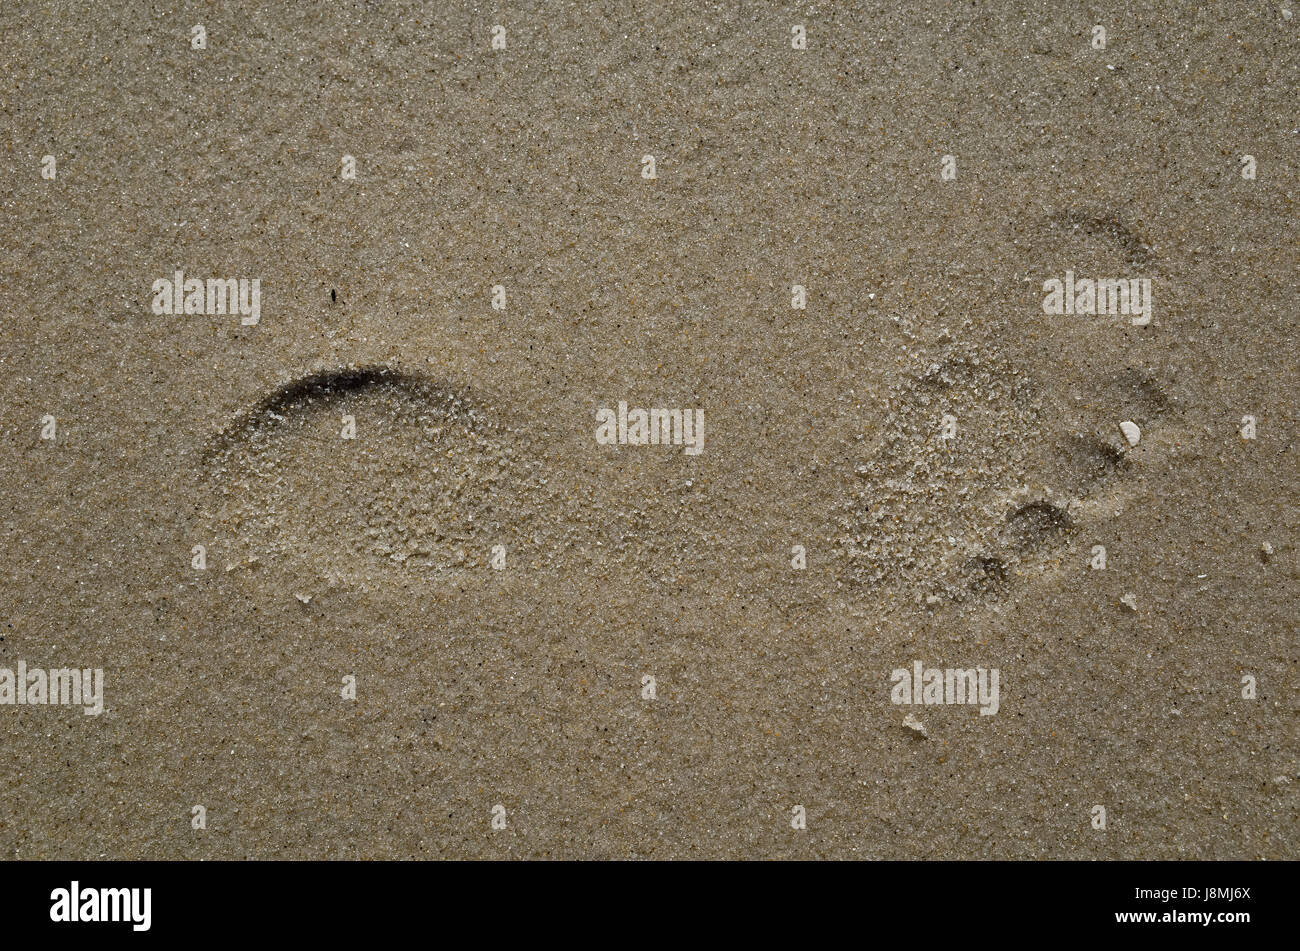 Young girl’s footprint left in the sand on a deserted beach. Stock Photo